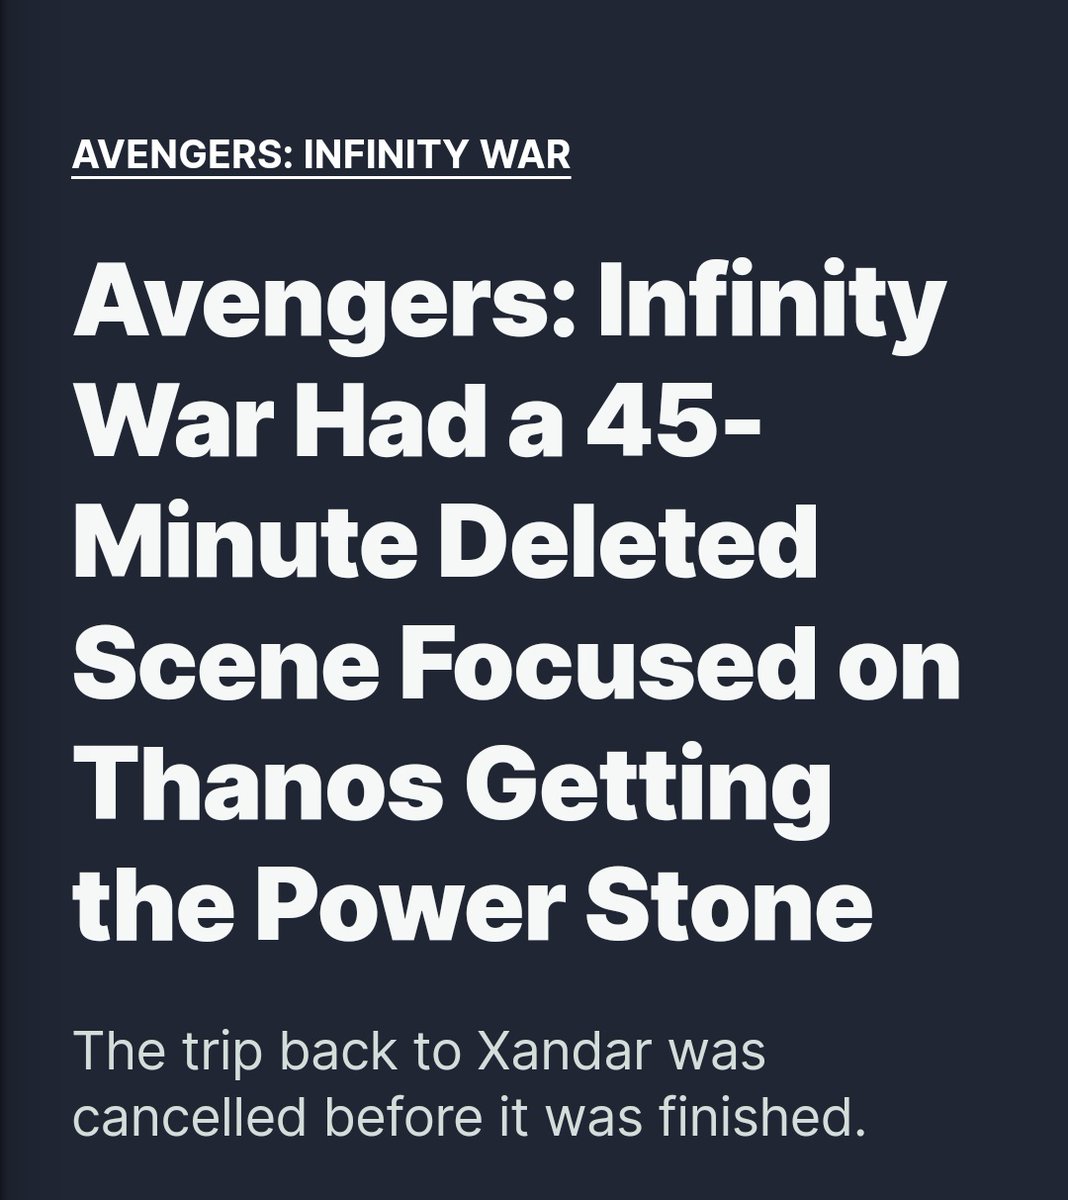 ✨Post infinity saga it was a perfect time to revisit xandar and see what thanos has done to it but it didn't happen until very recent a news came out that a Nova special is being developed and maybe they can repurpose the cut scenes of xandar from infinity war and put it  there